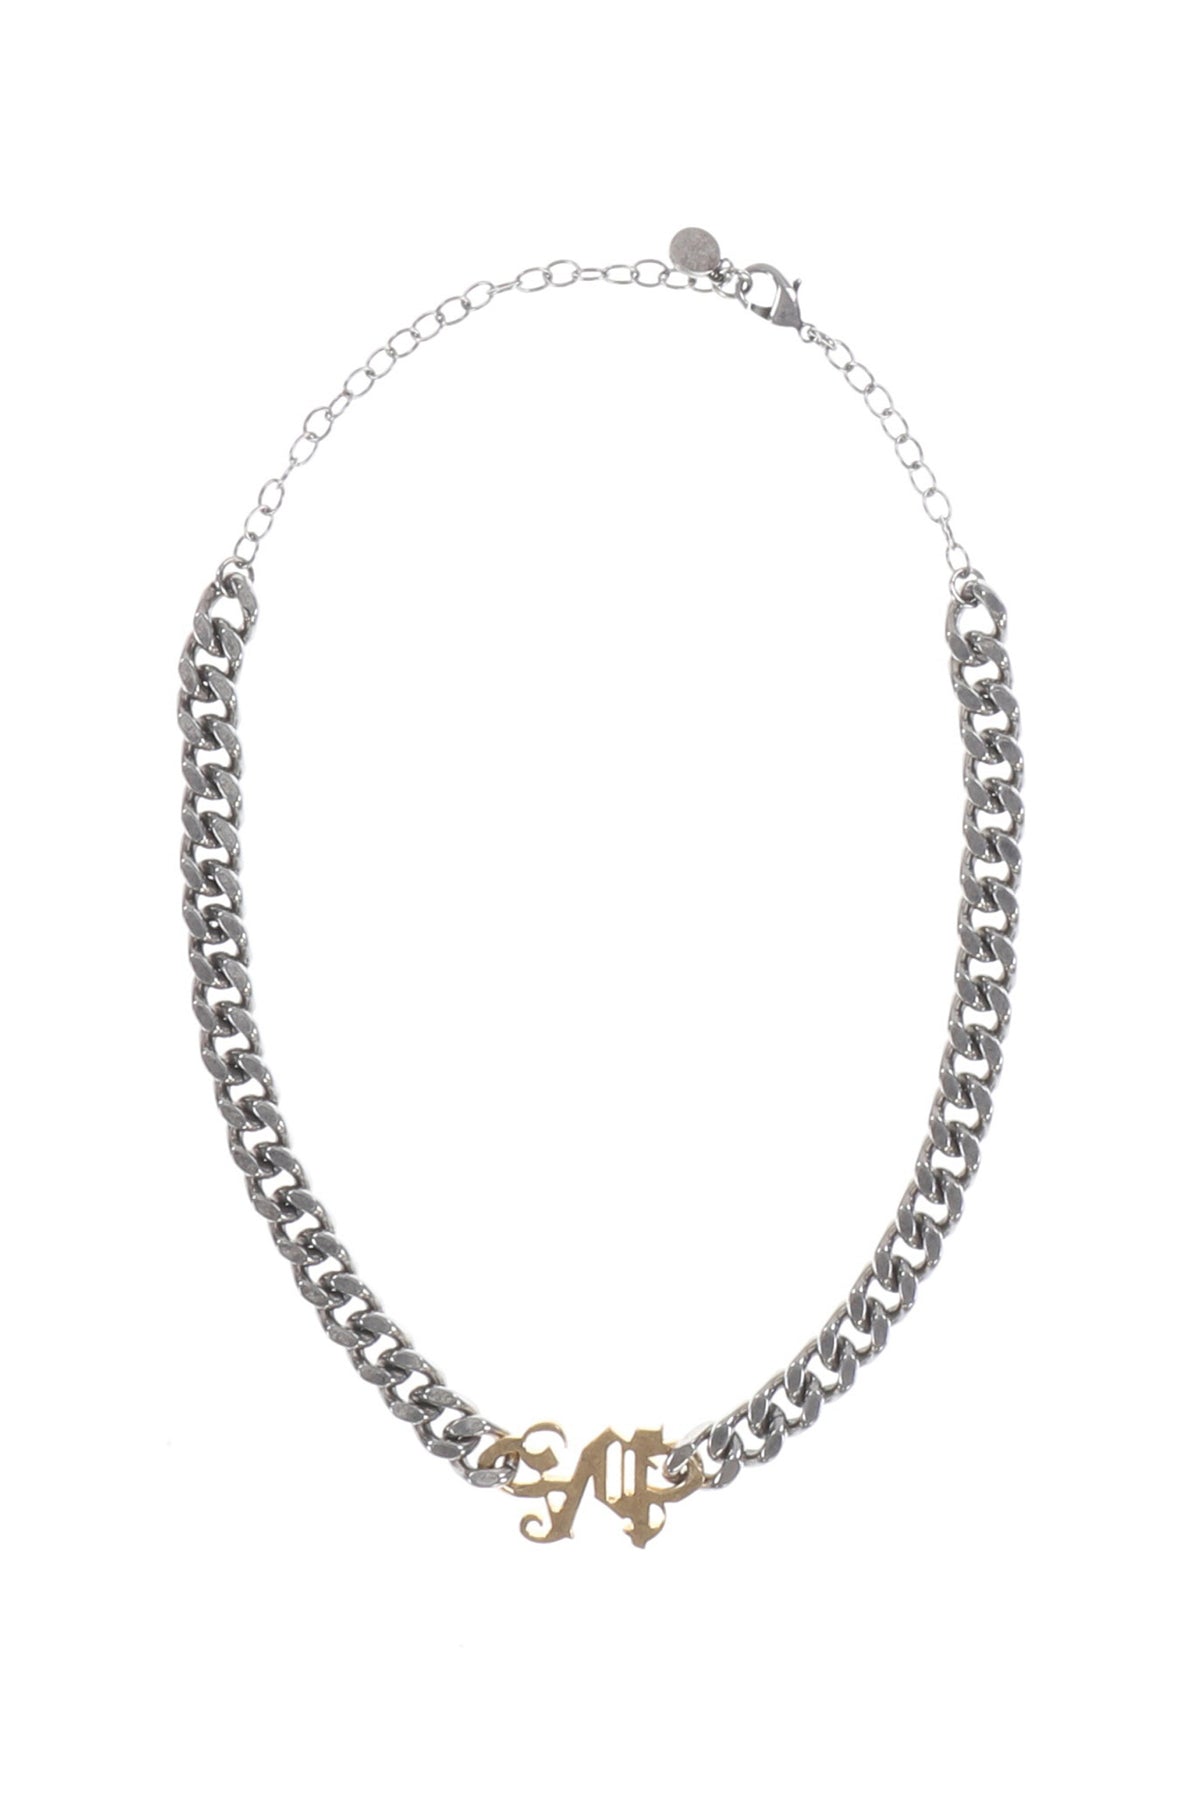 PA MONOGRAM CHAIN NECKLACE / SIL GOLD